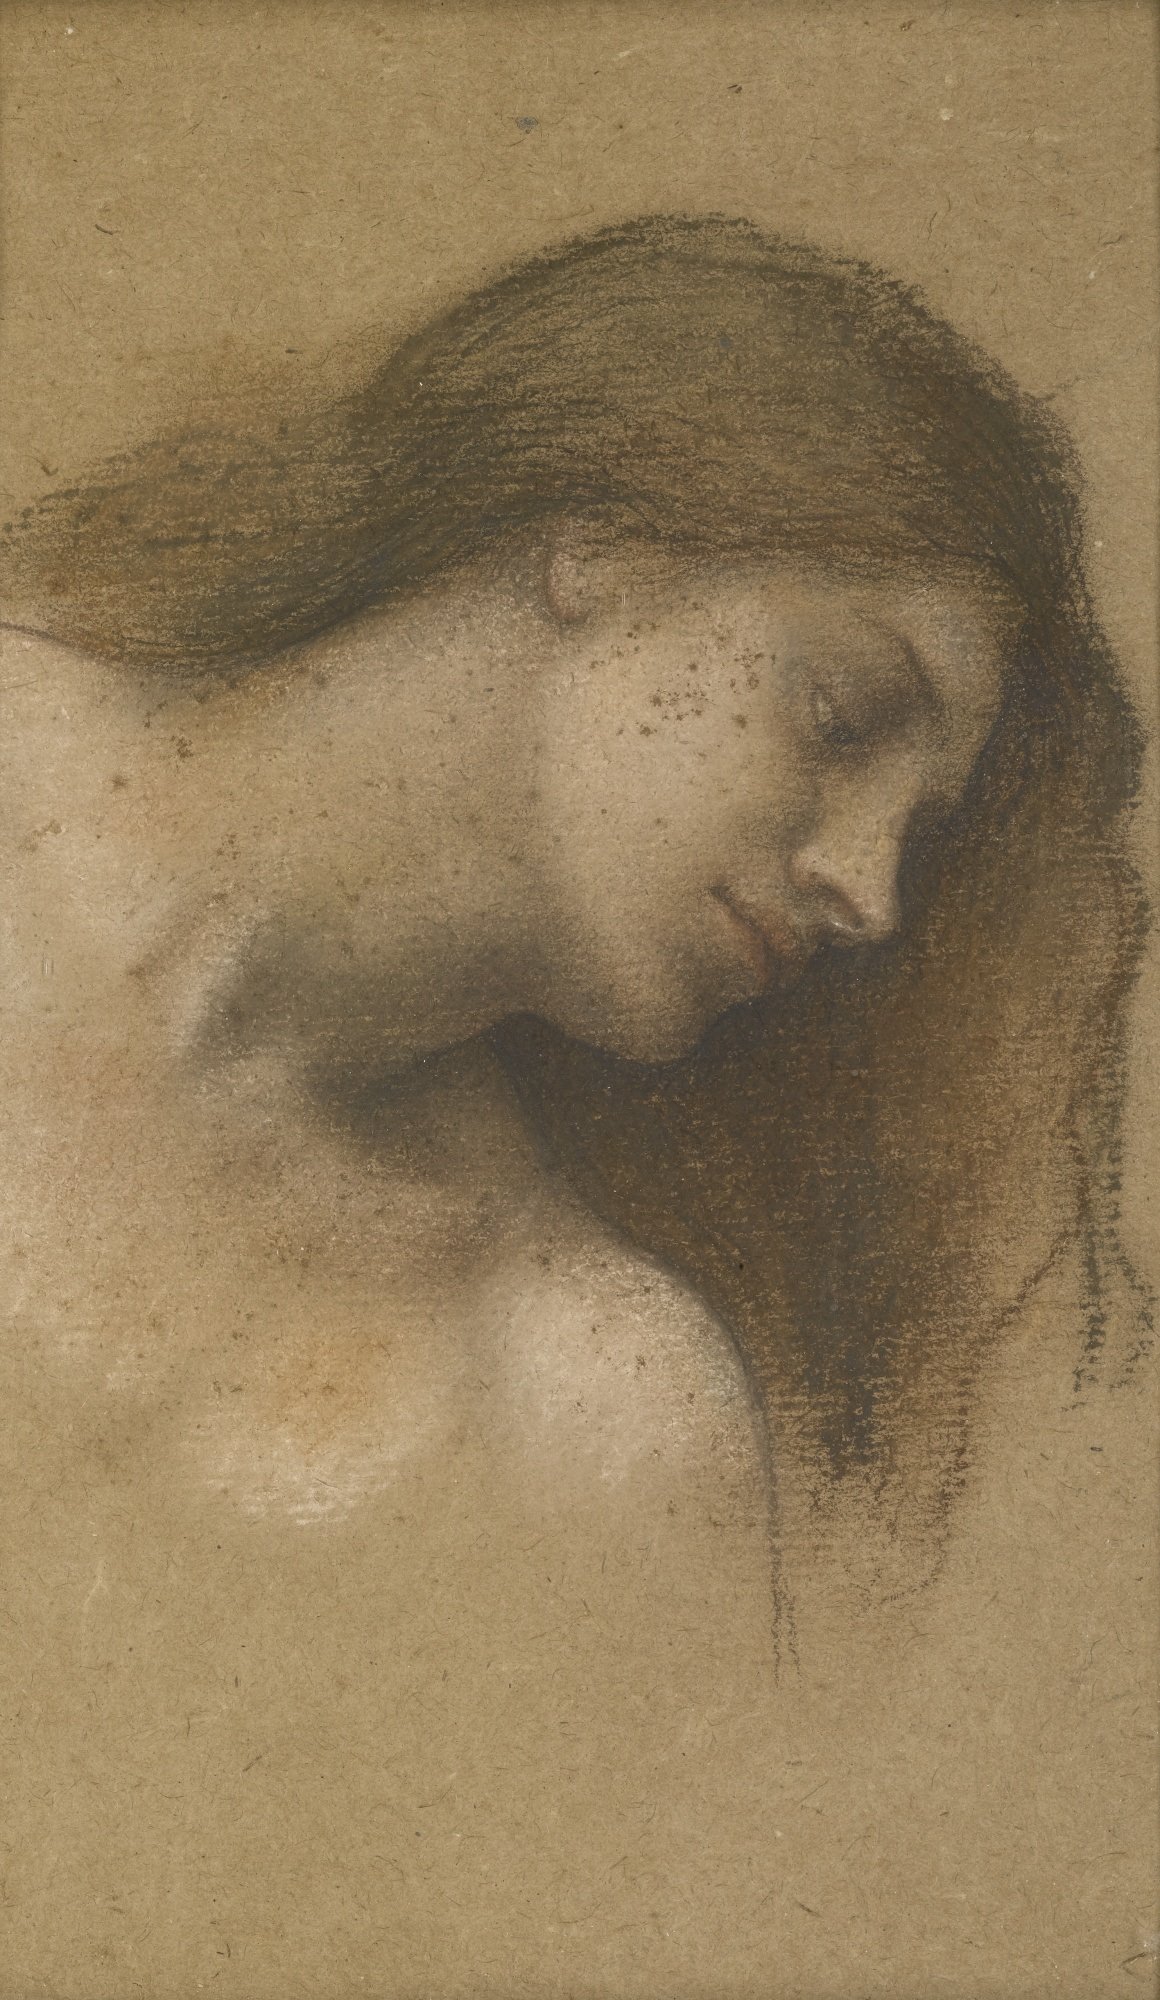 Study of a woman